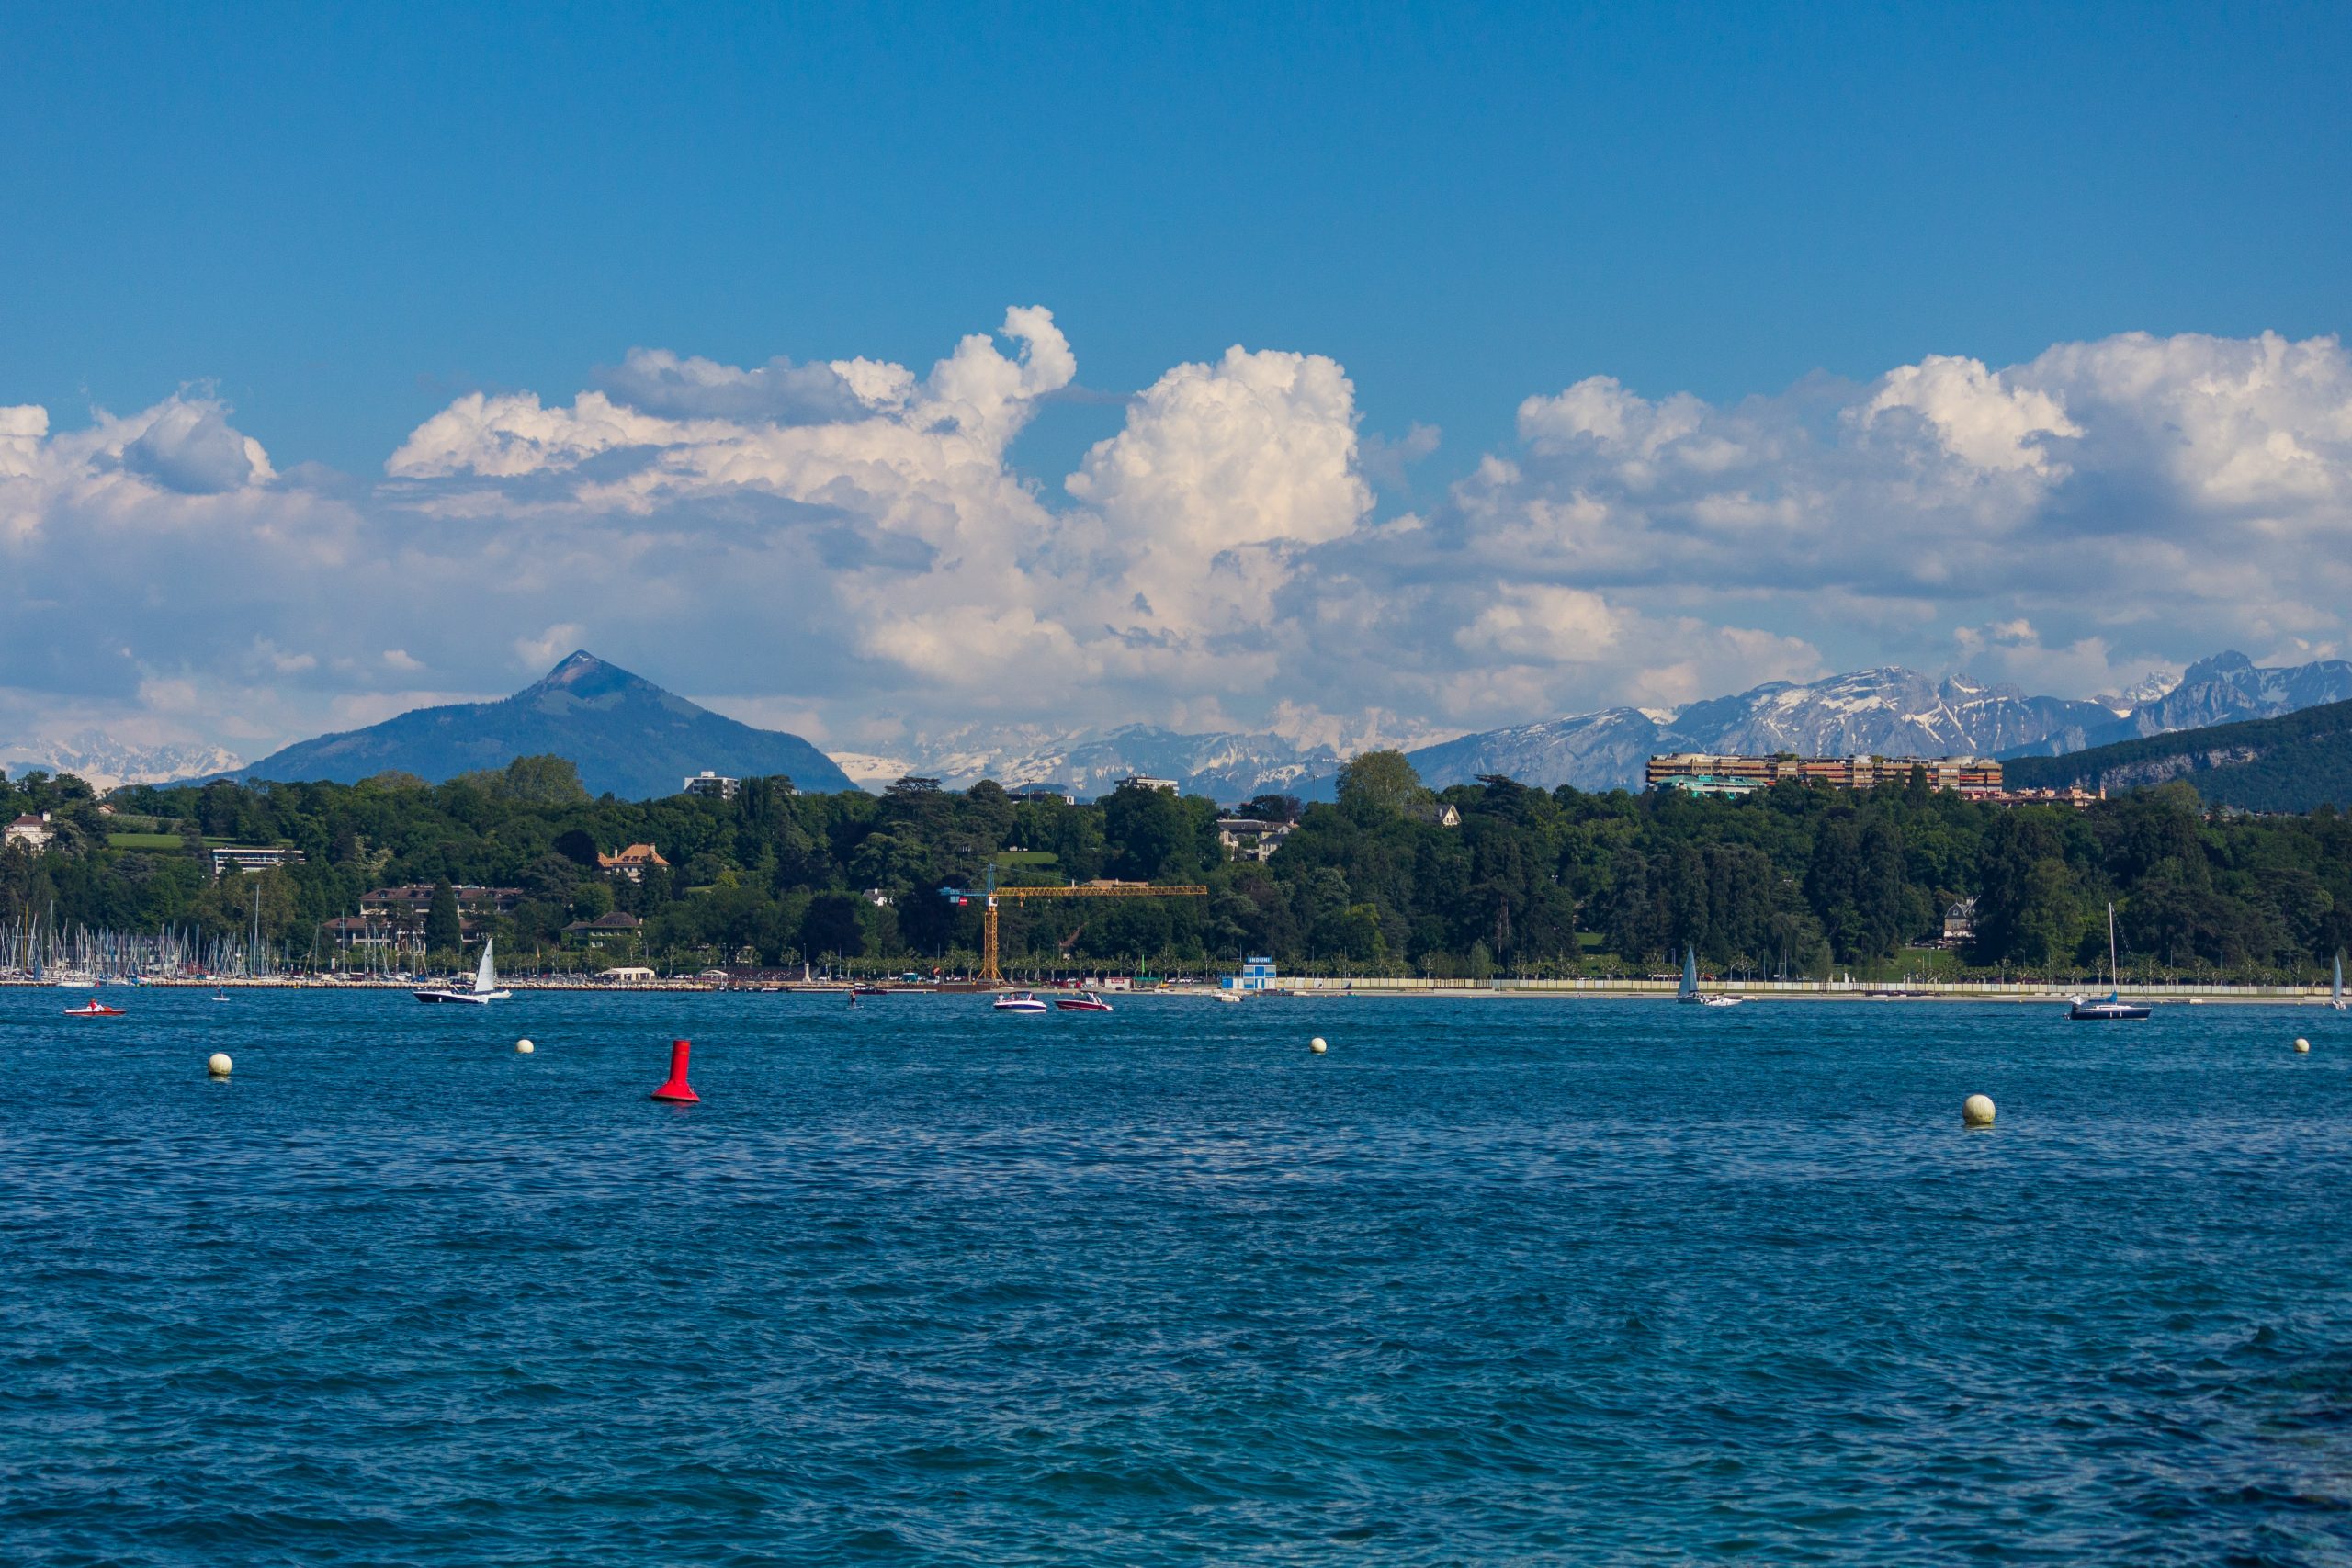 Lake geneva with a scenic background
3